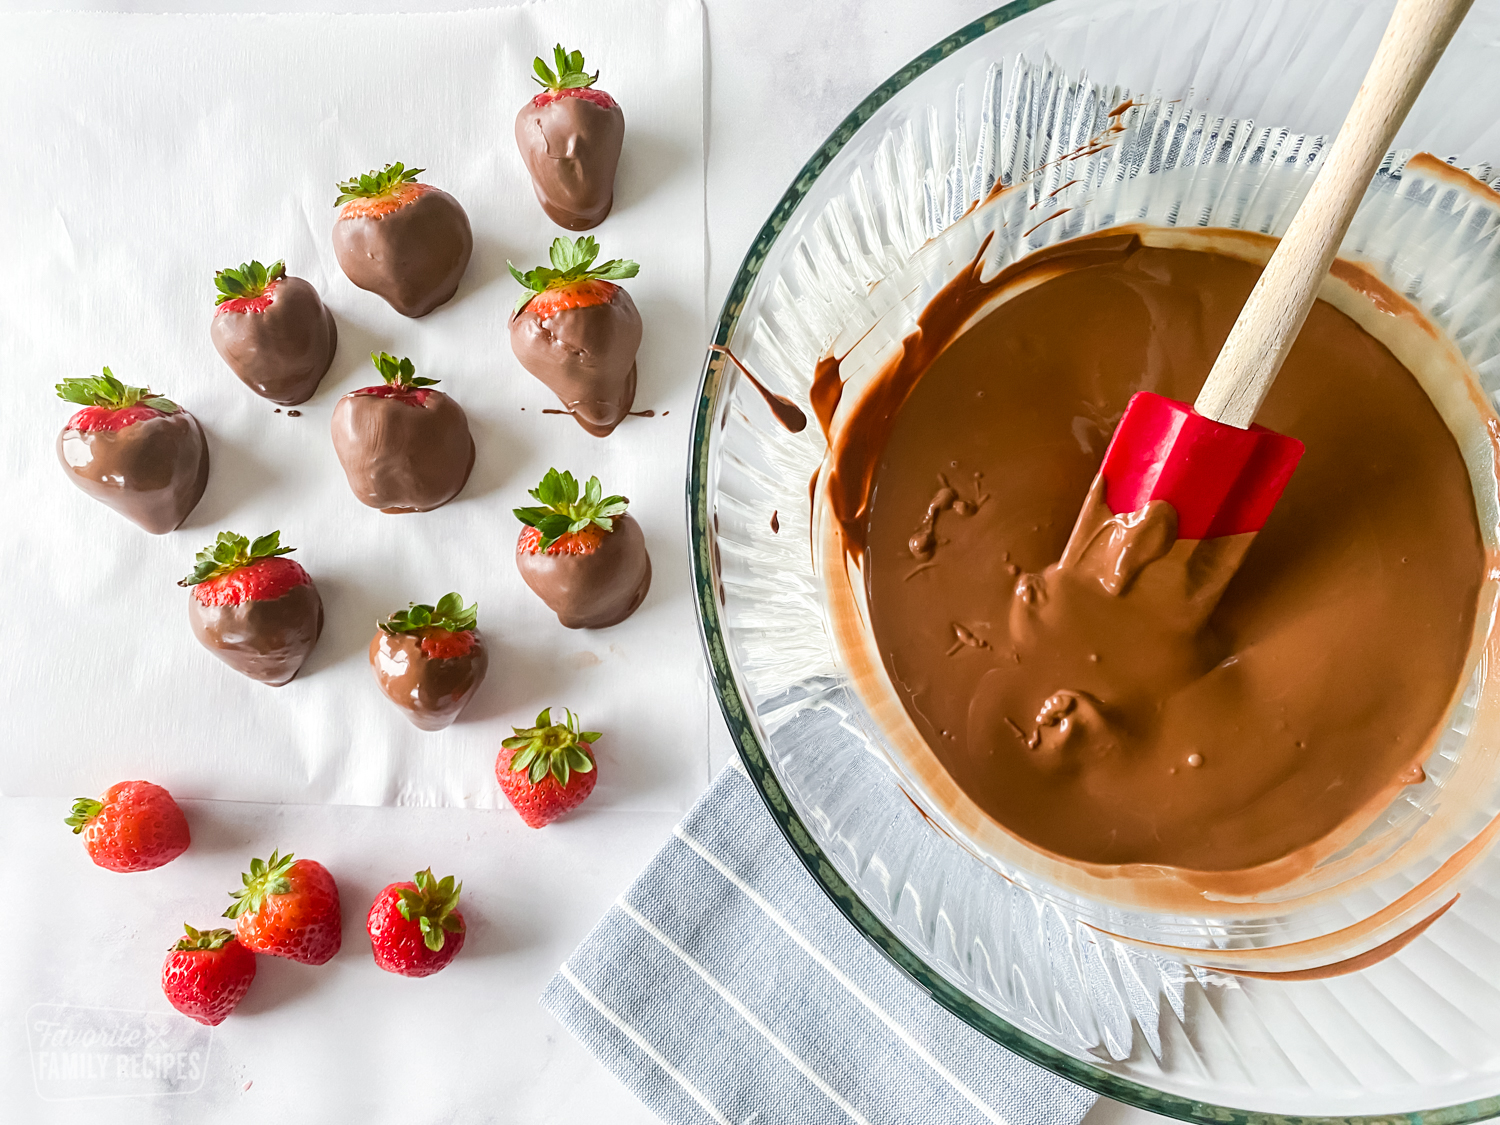 Strawberries dipped in chocolate on parchment paper.